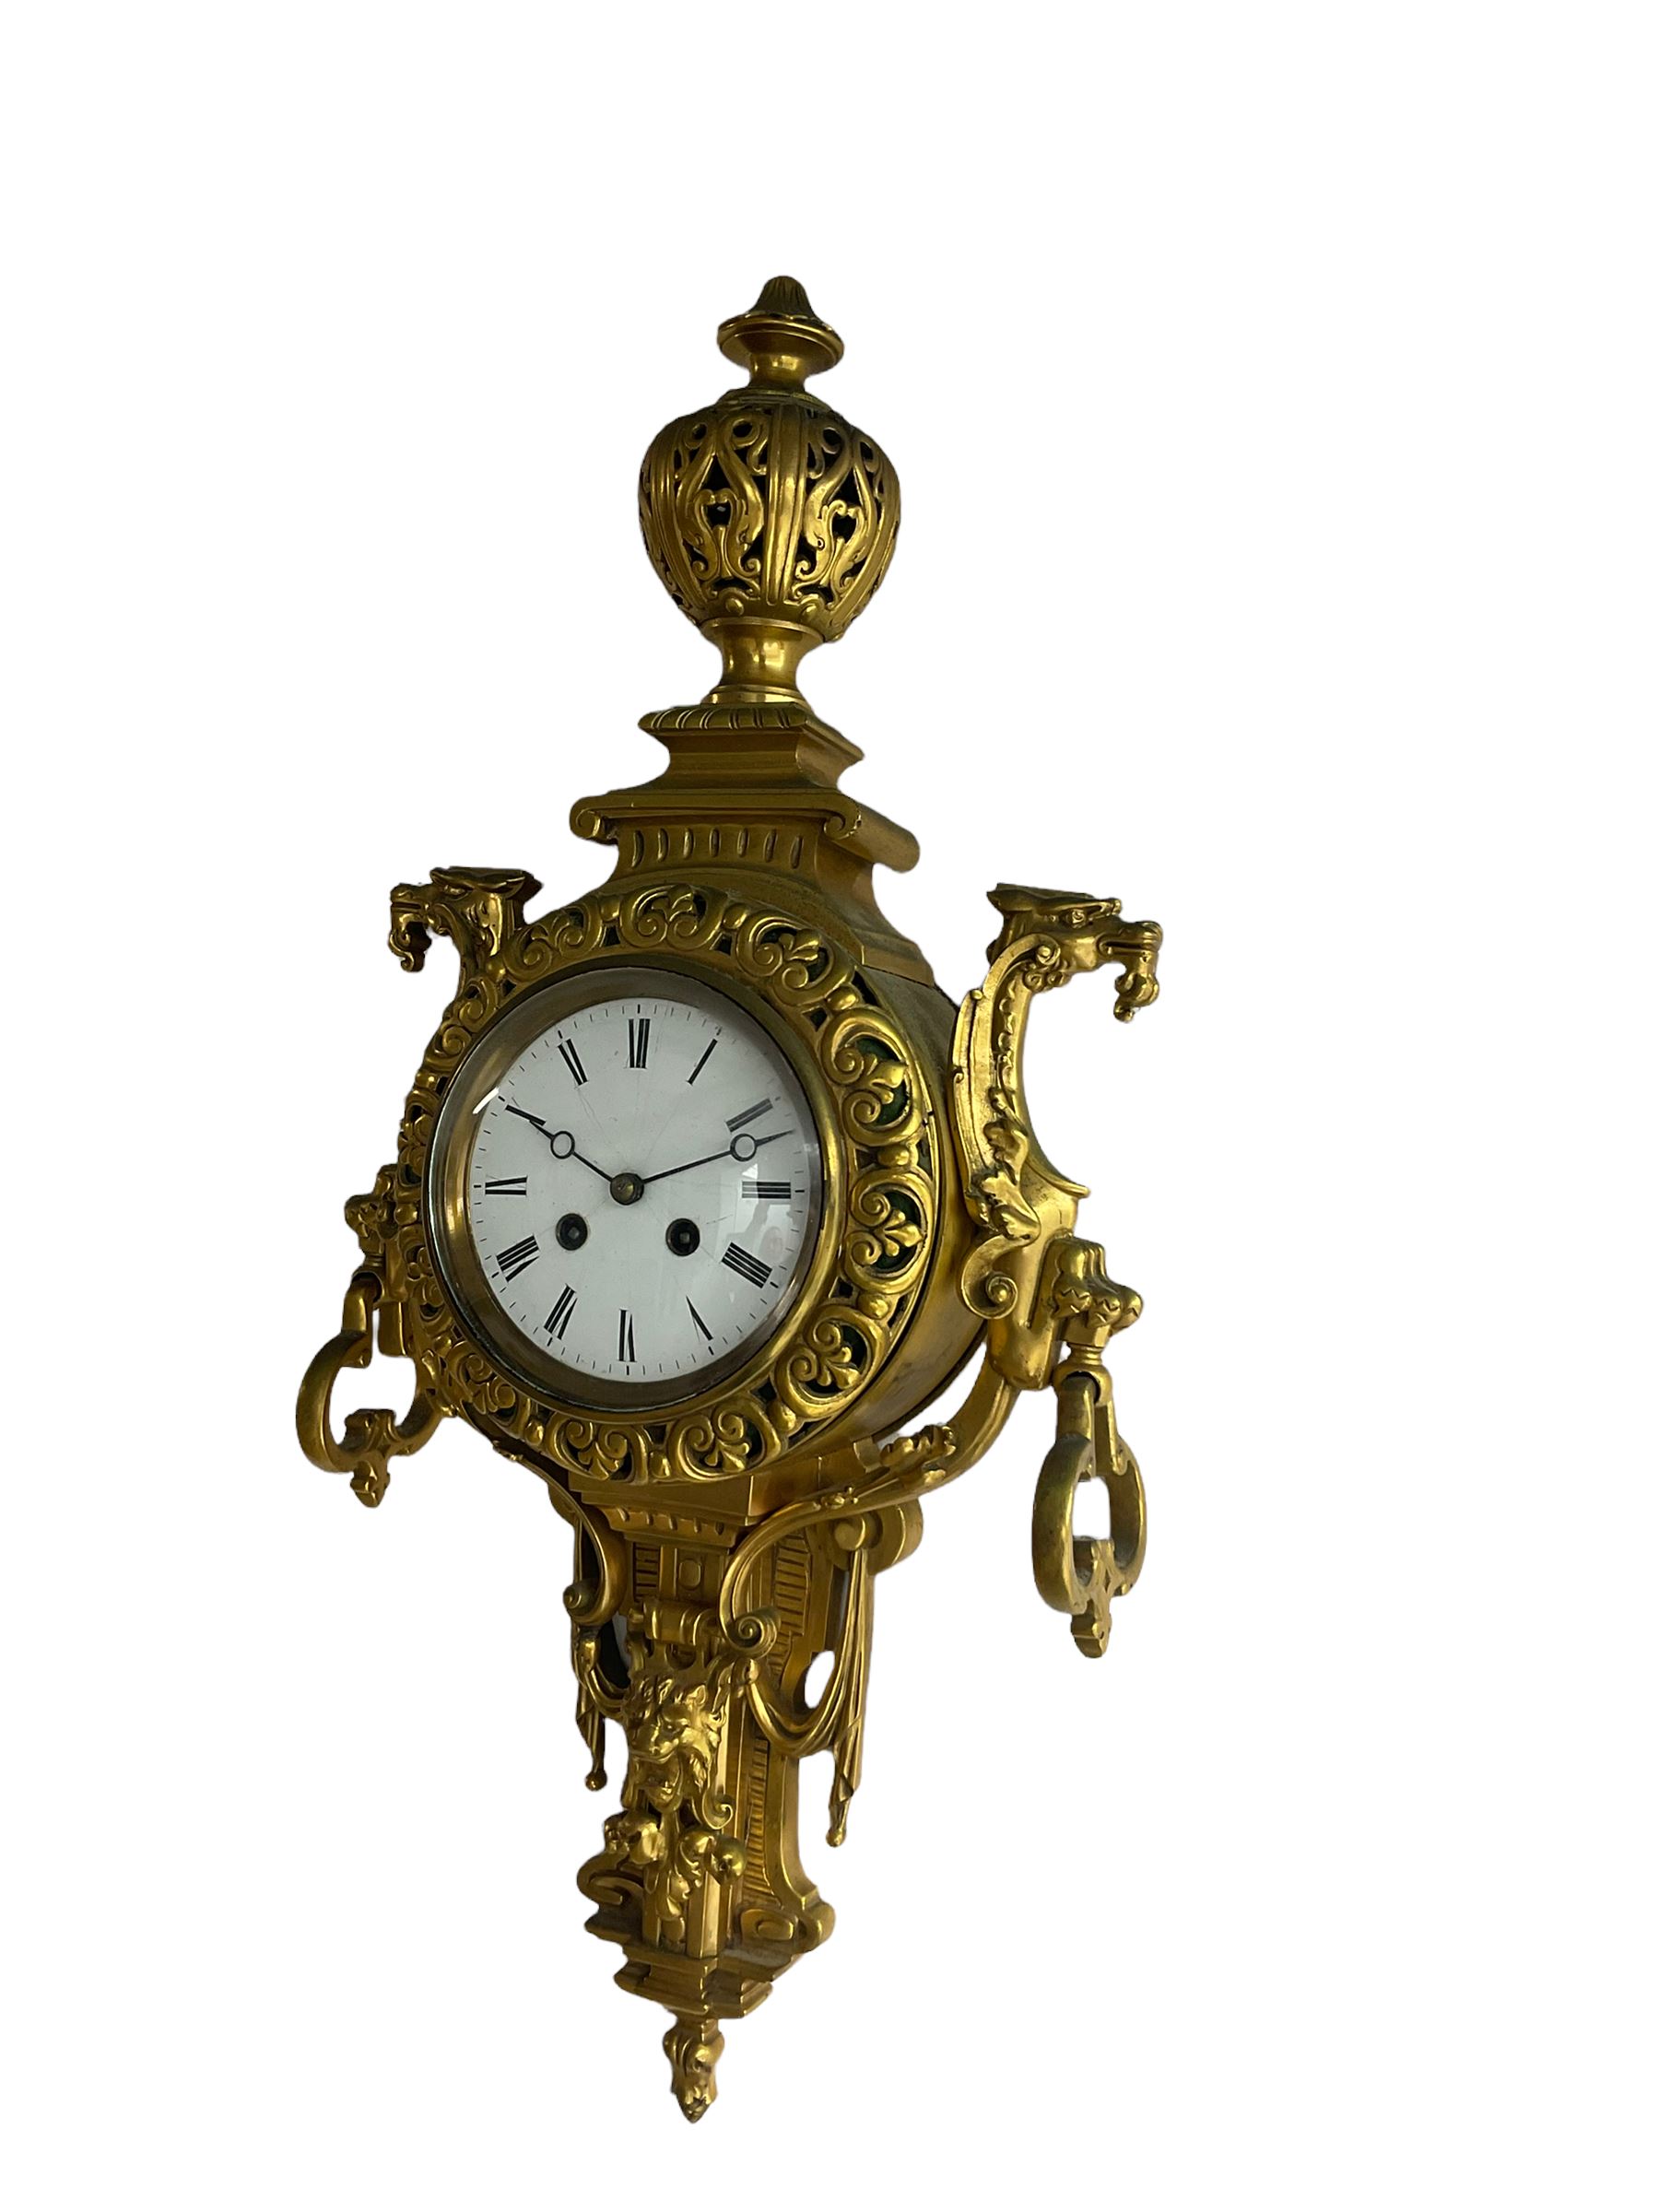 An imposing and decorative late 19th century French wall clock c1890 - Image 3 of 4